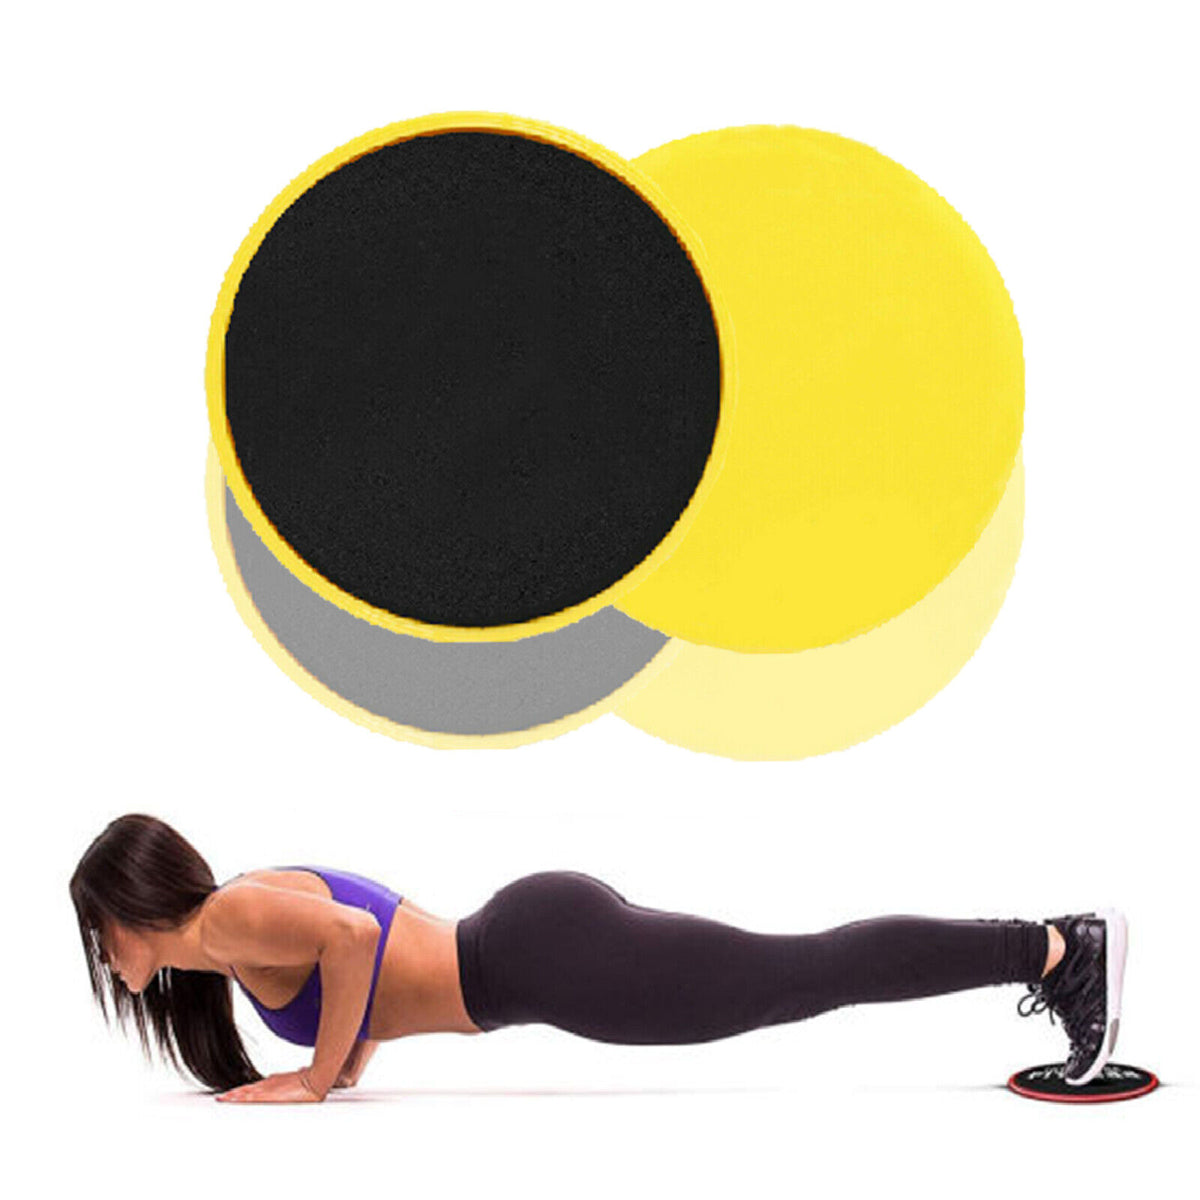 CORE SLIDERS BY Beast Gear – Double Sided Gliding Discs for Abdominal  Exercises £13.79 - PicClick UK